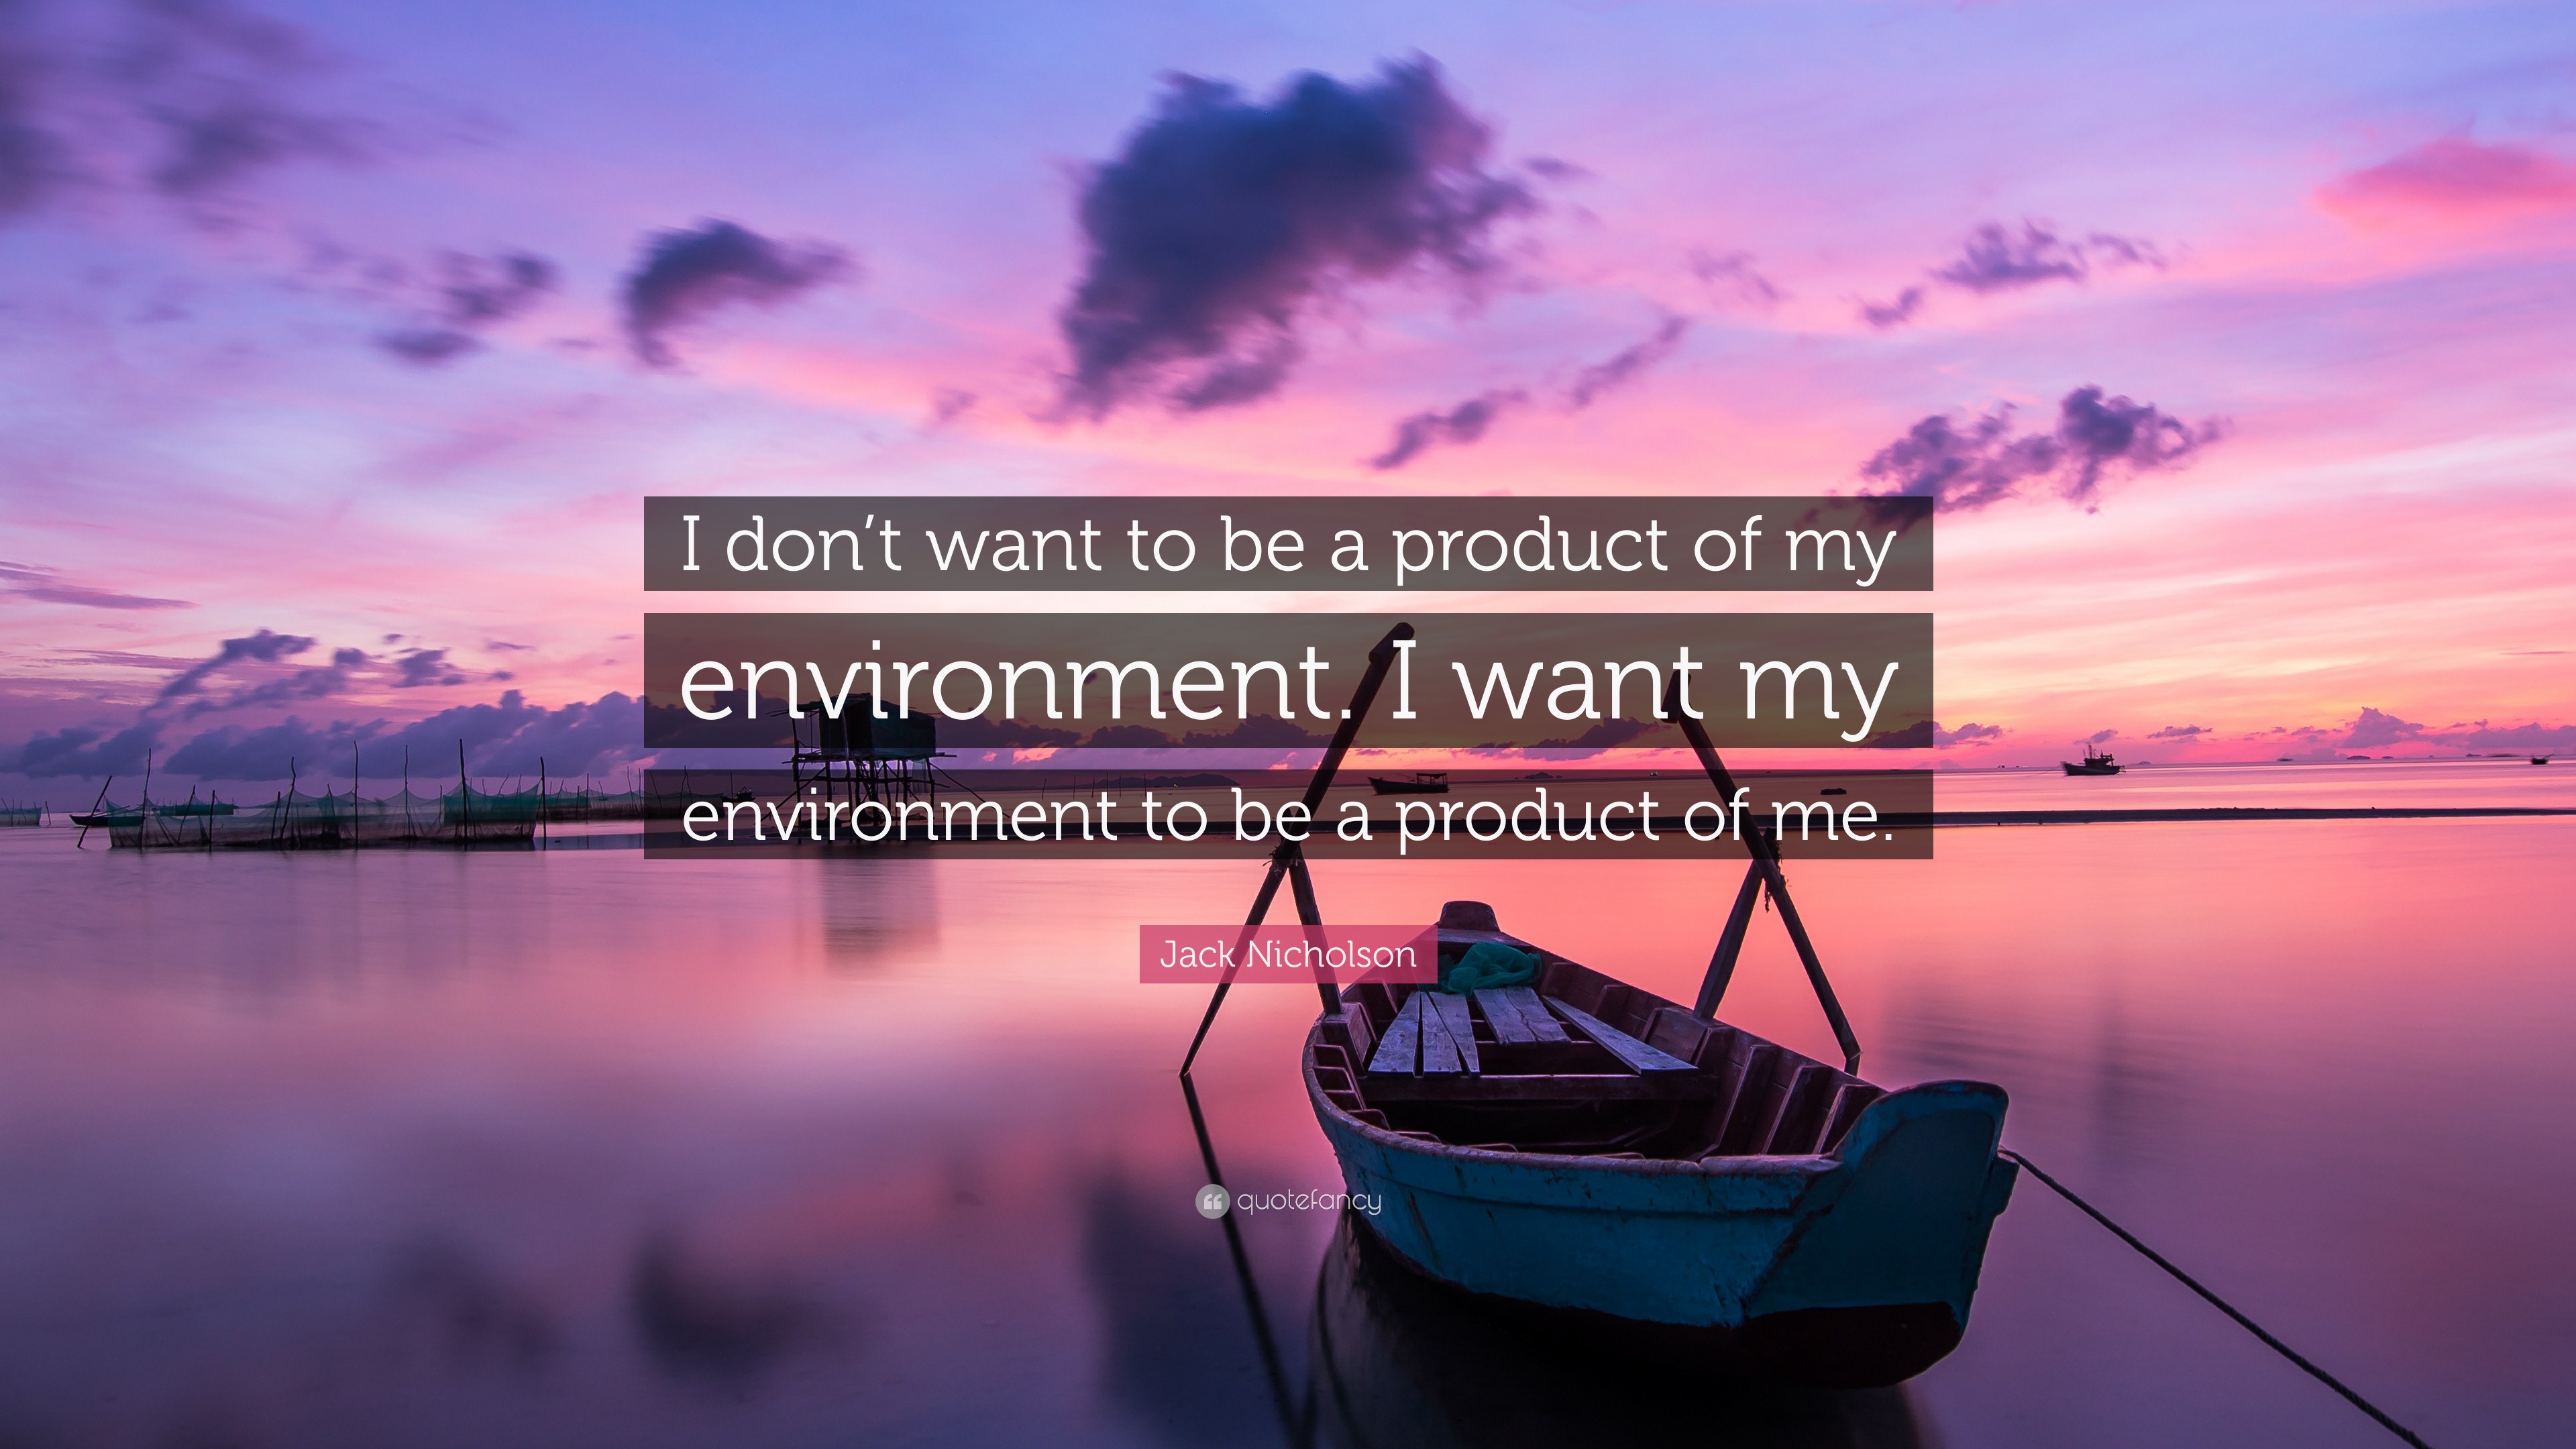 Jack Nicholson Quote: “I don’t want to be a product of my environment